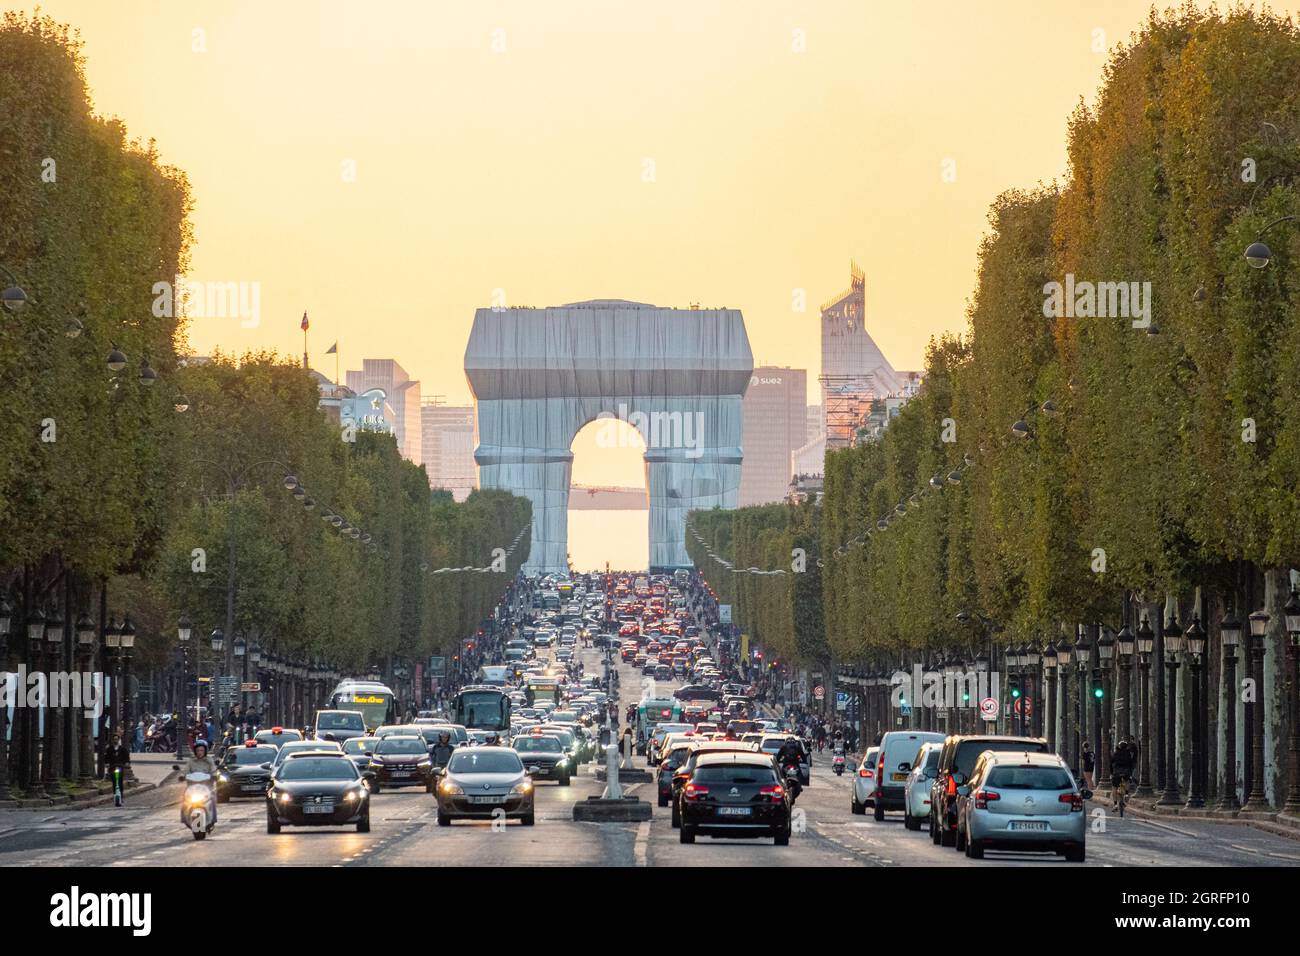 France, Paris, Champs-Elysees and Arc de Triomphe wrapped by Jeanne-Claude and Christo, September 18 to October 3, 2021 Stock Photo